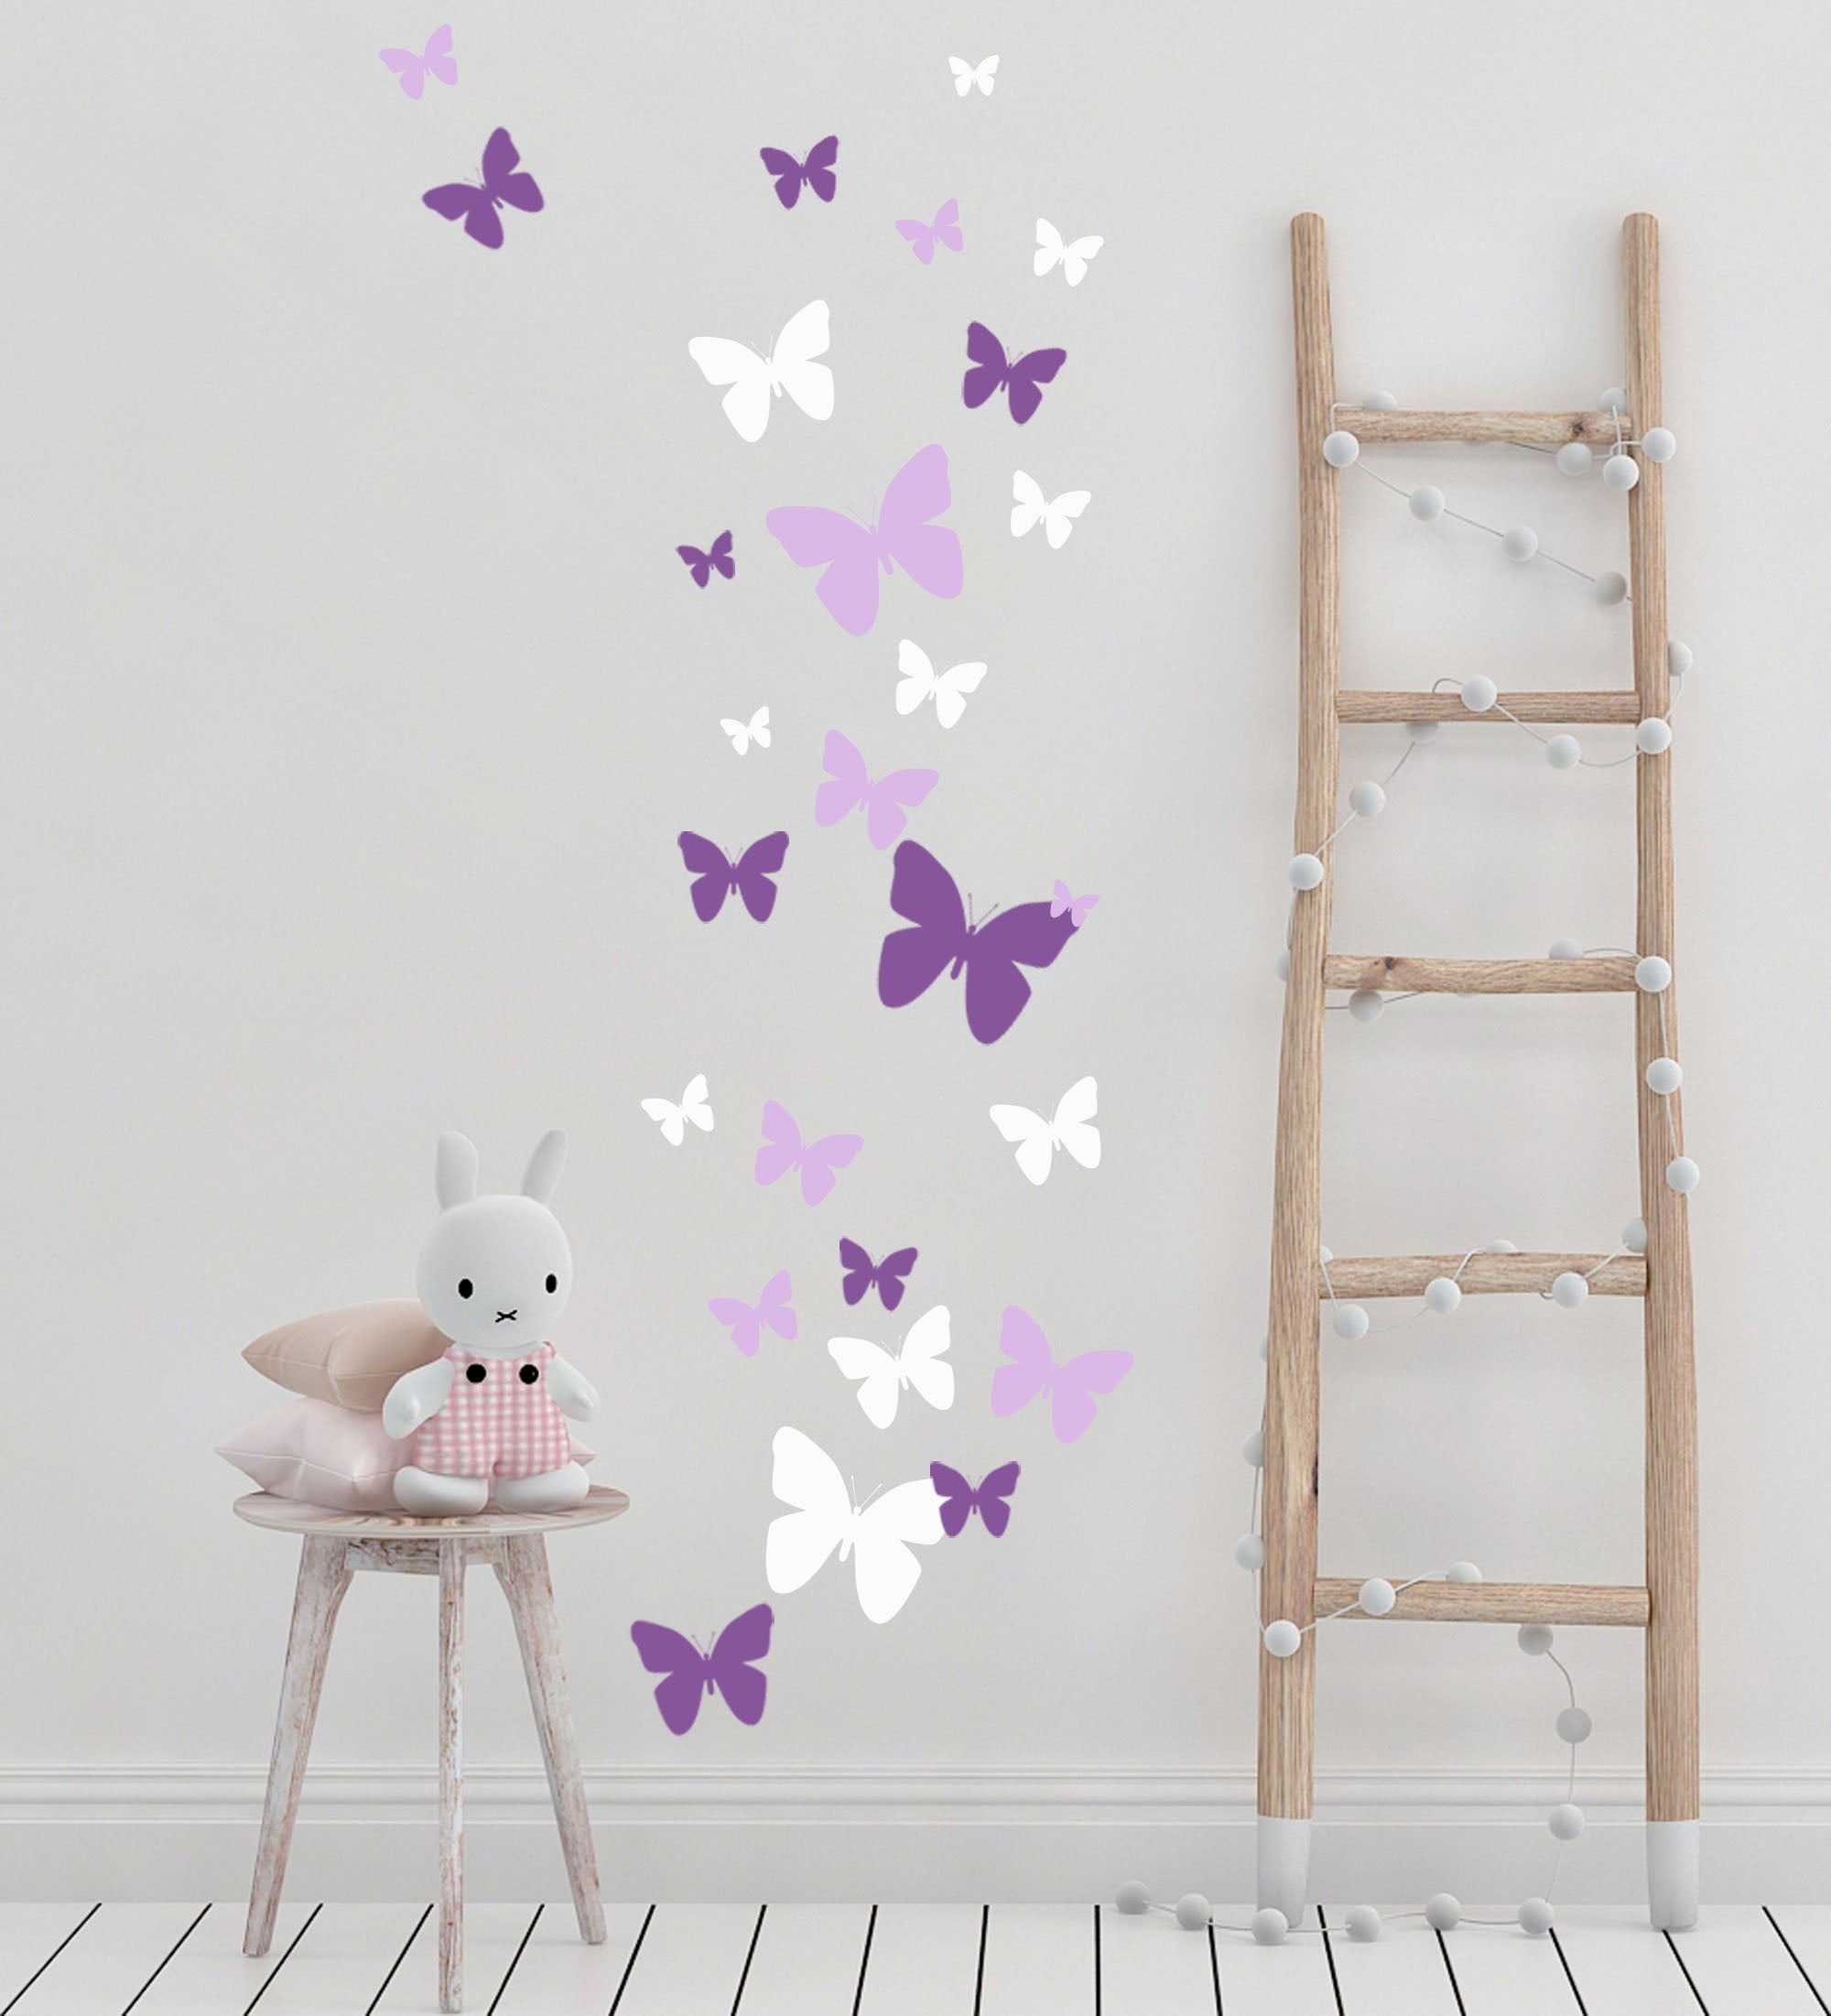 30 Creative Ideas for Decorating With Wall Decals | LoveToKnow